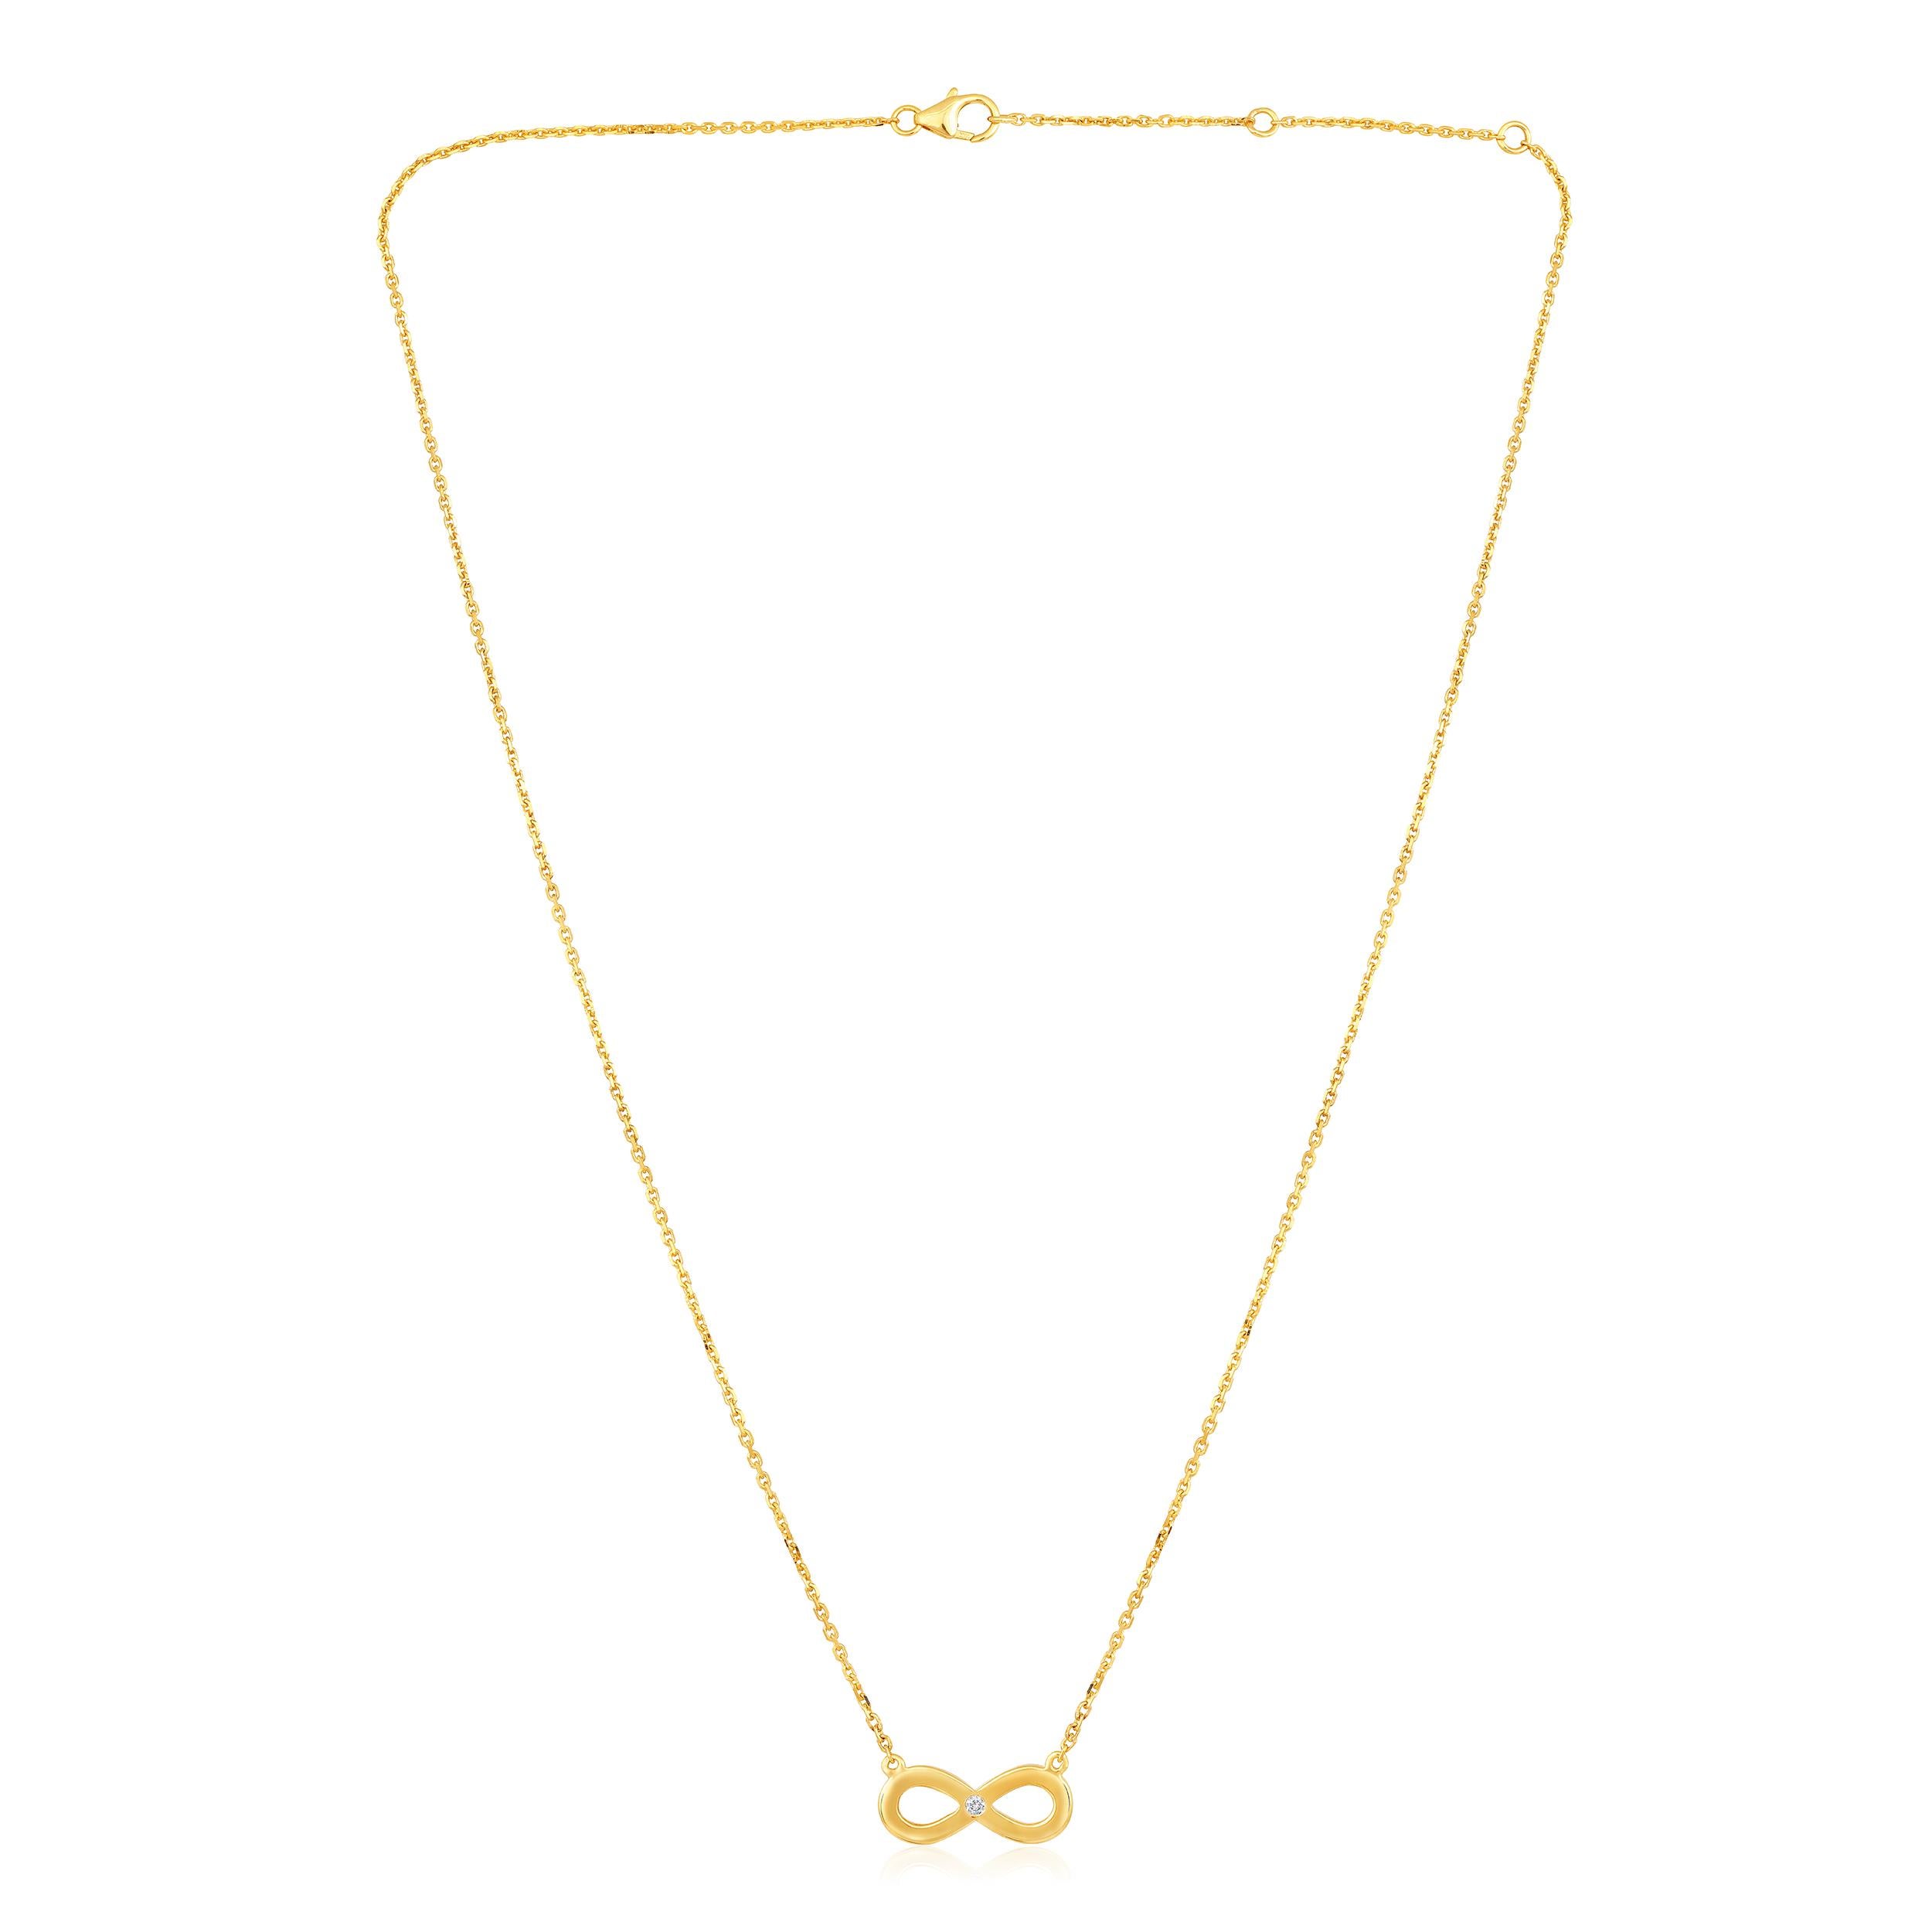 Crafted in 3.2 grams of 14K Yellow Gold, the necklace contains 1 stones of Round Diamonds with a total of 0.02 carat in F-G color and I1  carat. The necklace length is 18 inches.

This jewelry piece will be expertly crafted by our skilled artisans